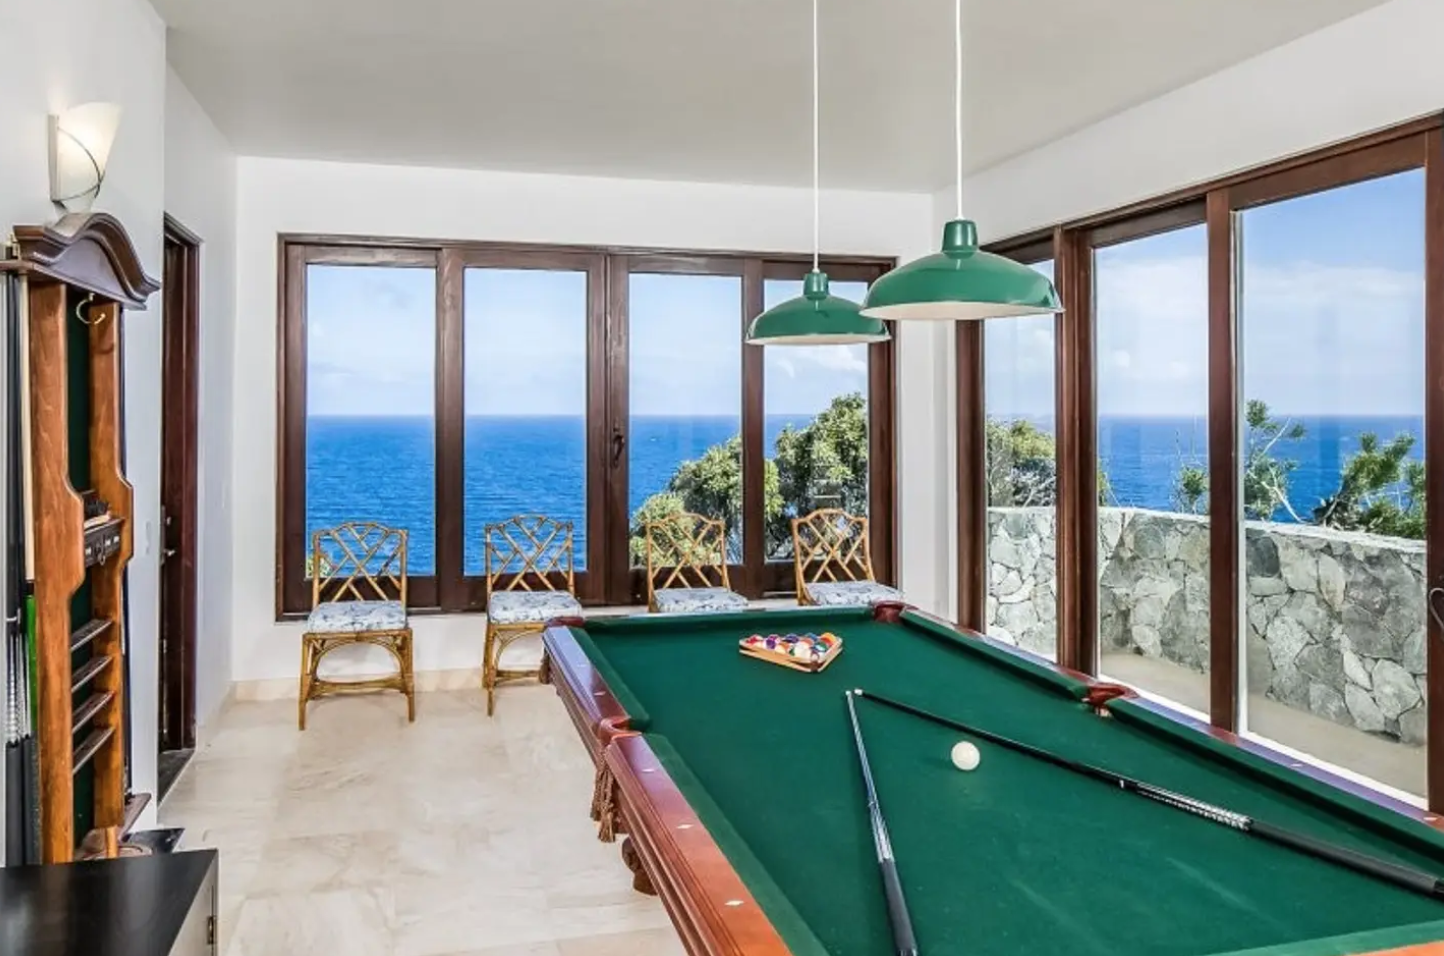 Billiards Room of "Finisterre" - a two-acre, three-building complex on St. John